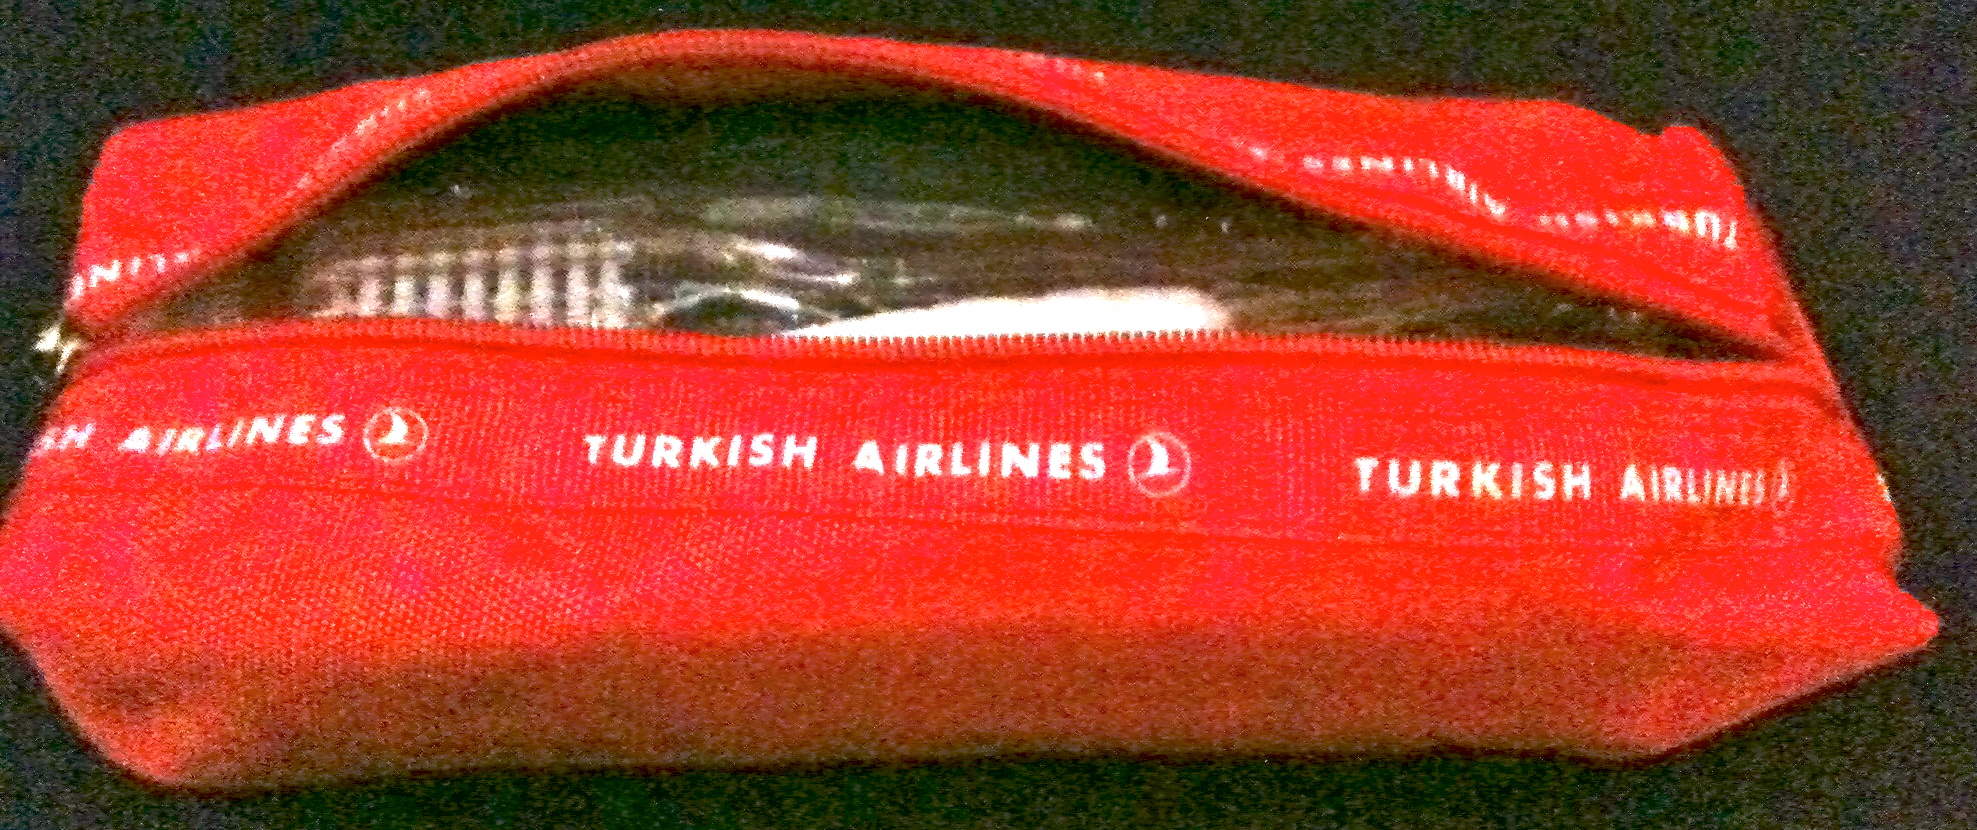 a red bag with white text